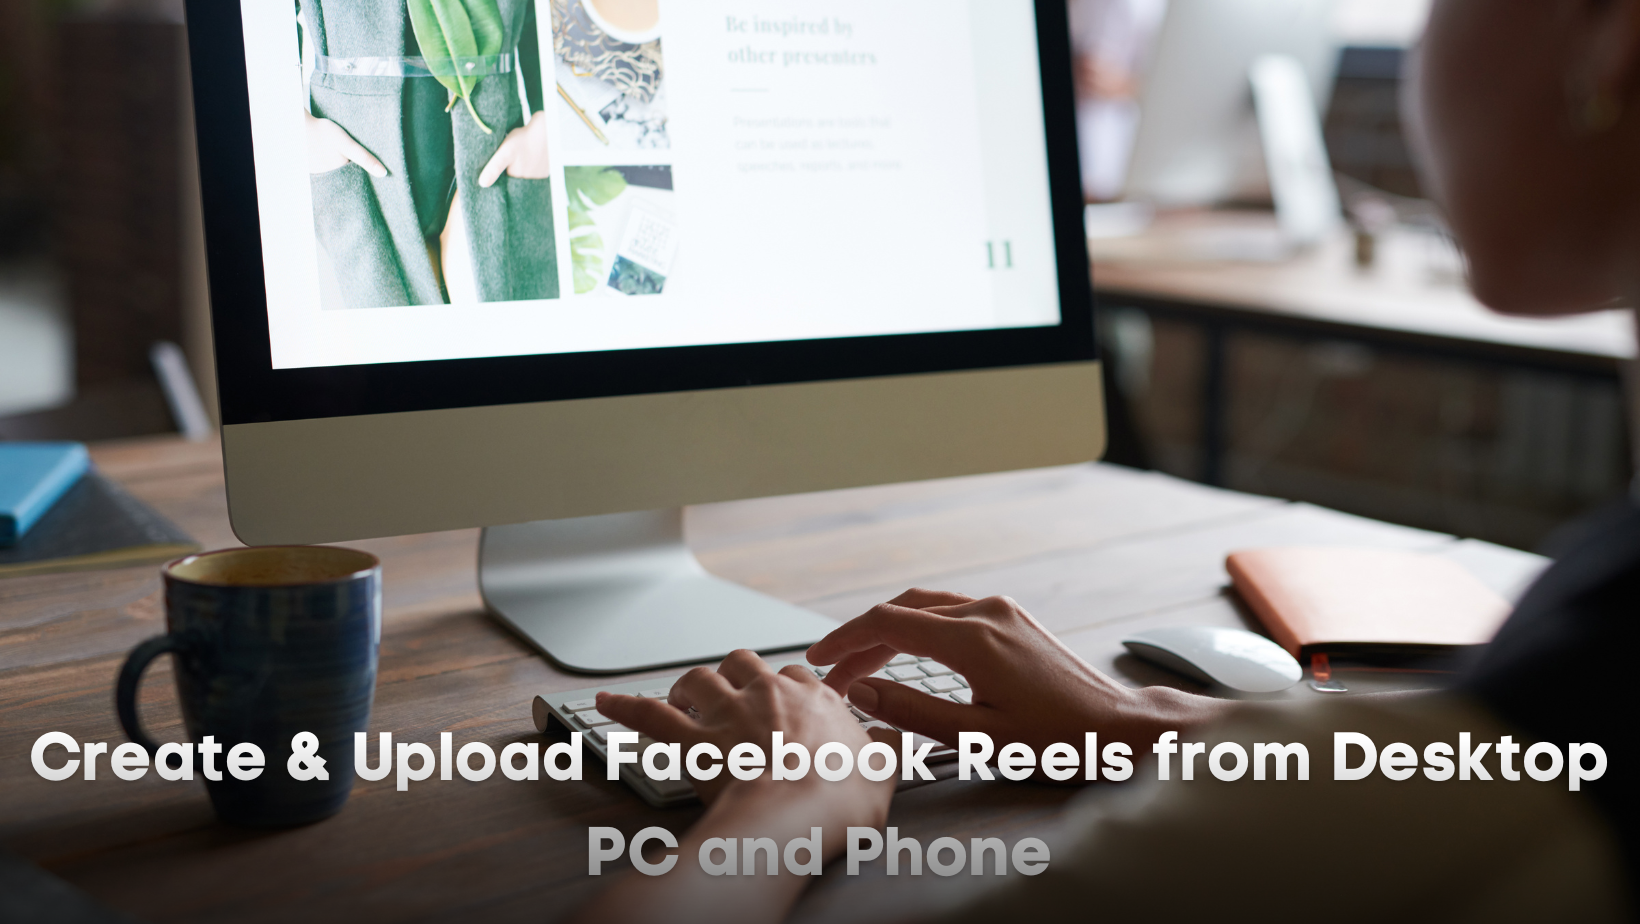 Create & Upload Facebook Reels from Desktop PC and Phone